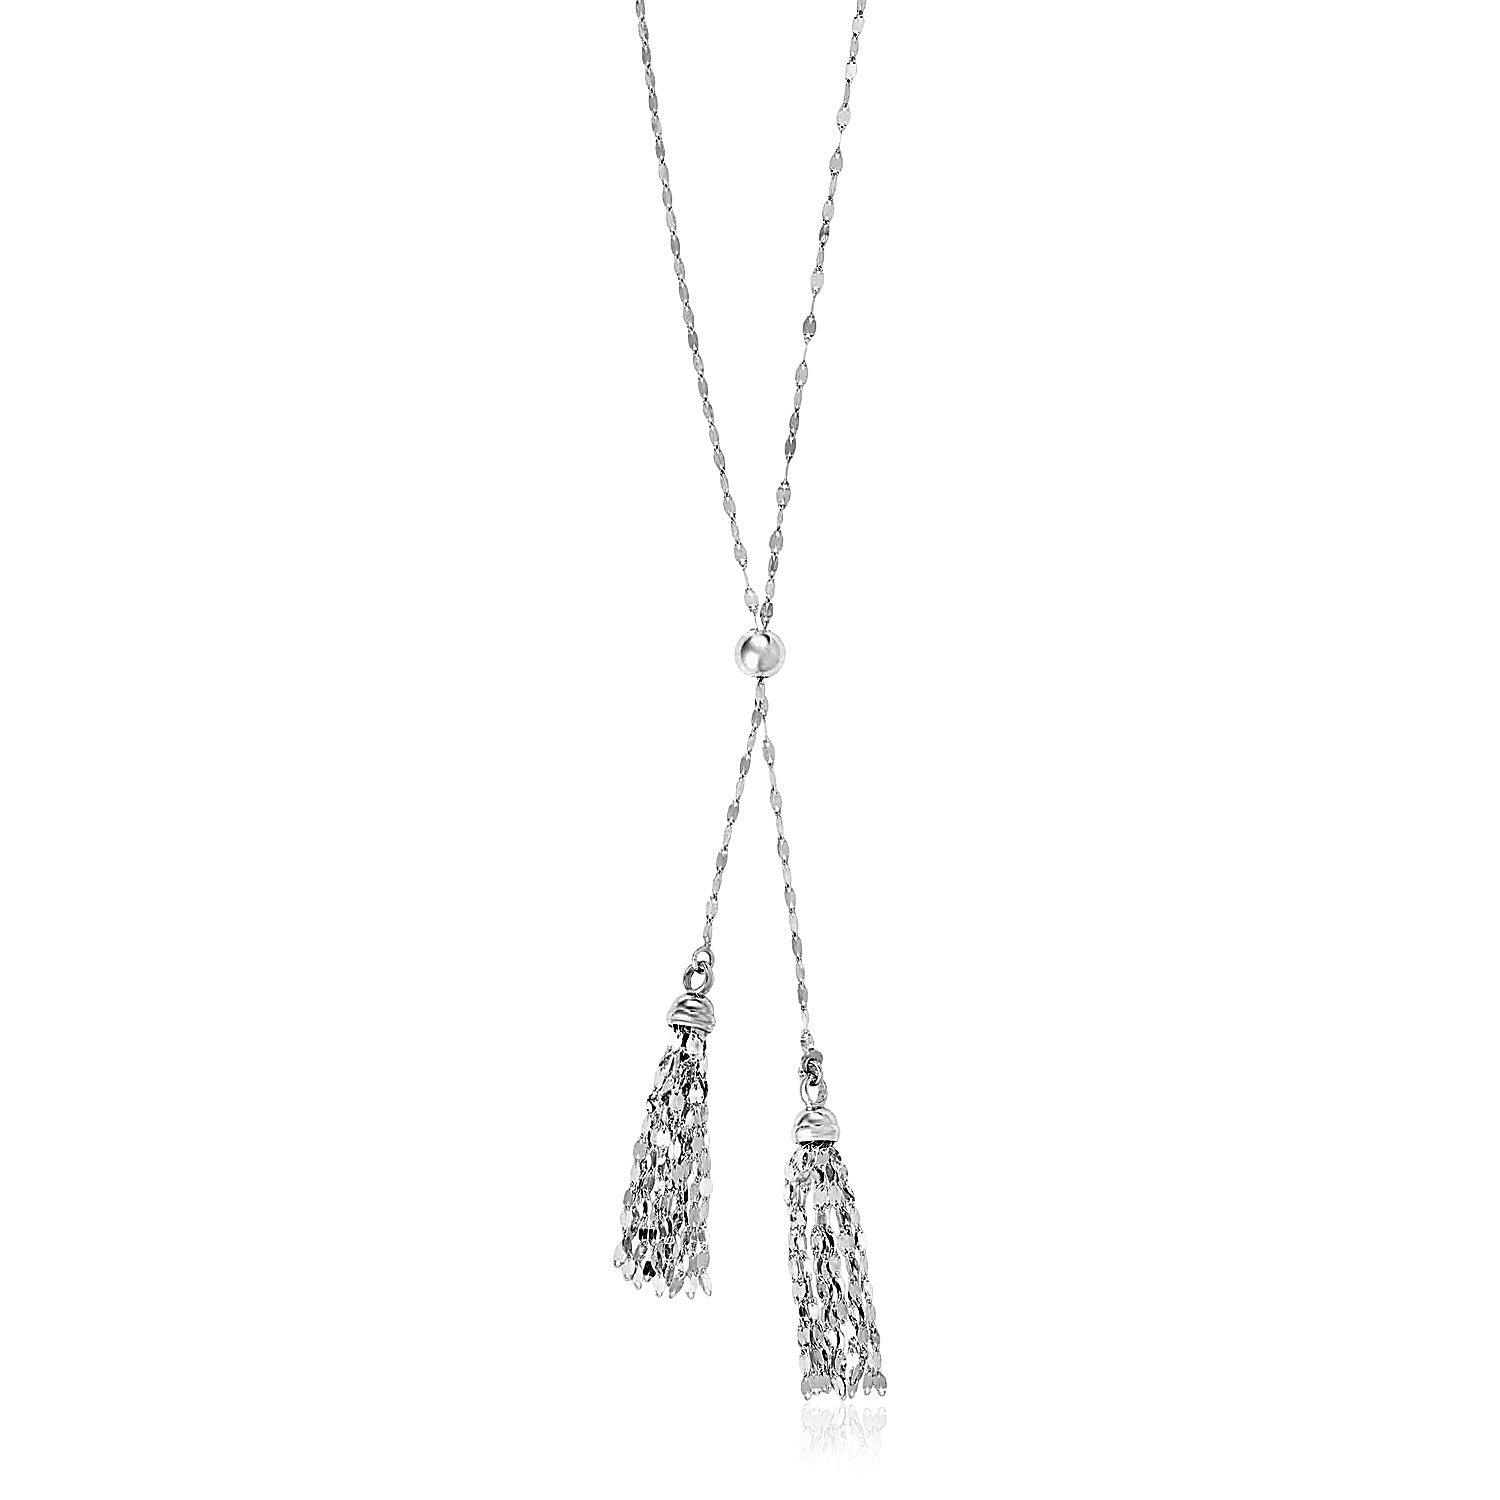 Sterling Silver Lariat Necklace with Polished Chain Tassels